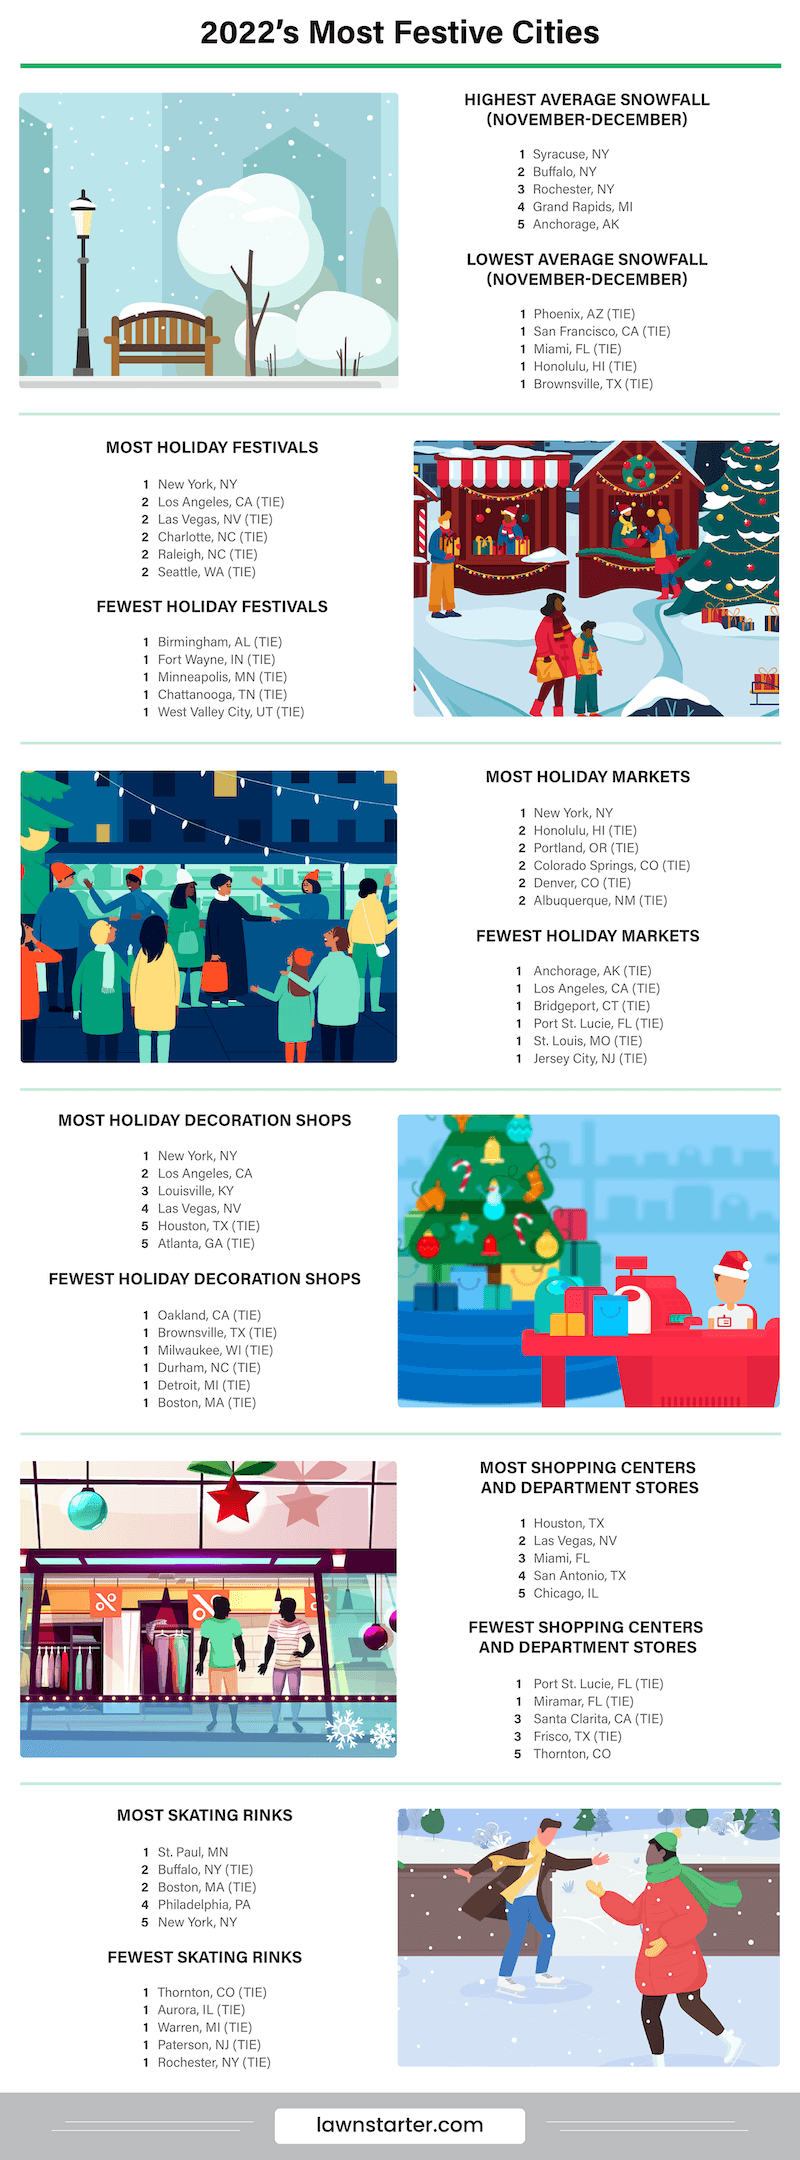 Infographic showing the Most Festive Cities in America, a ranking based on 20 factors, such as snowfall, holiday festivals, and ice rinks